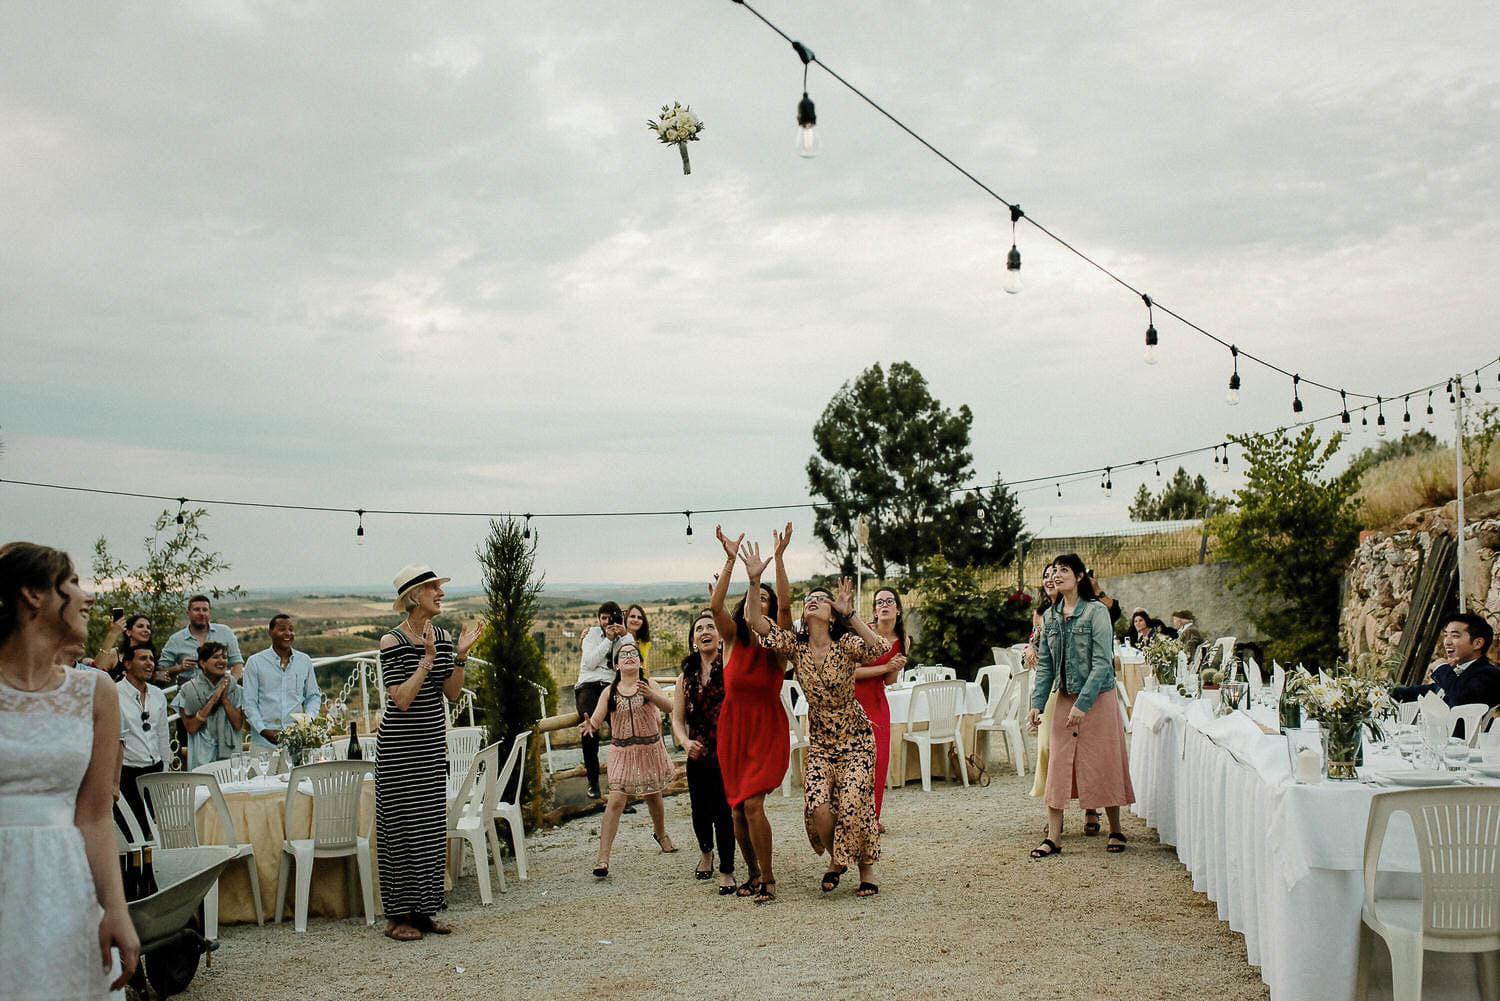 portuguese Wedding in the Portuguese Countryside - bouquet toss with the bridal bouquet flying through the air while the girl try to catch it